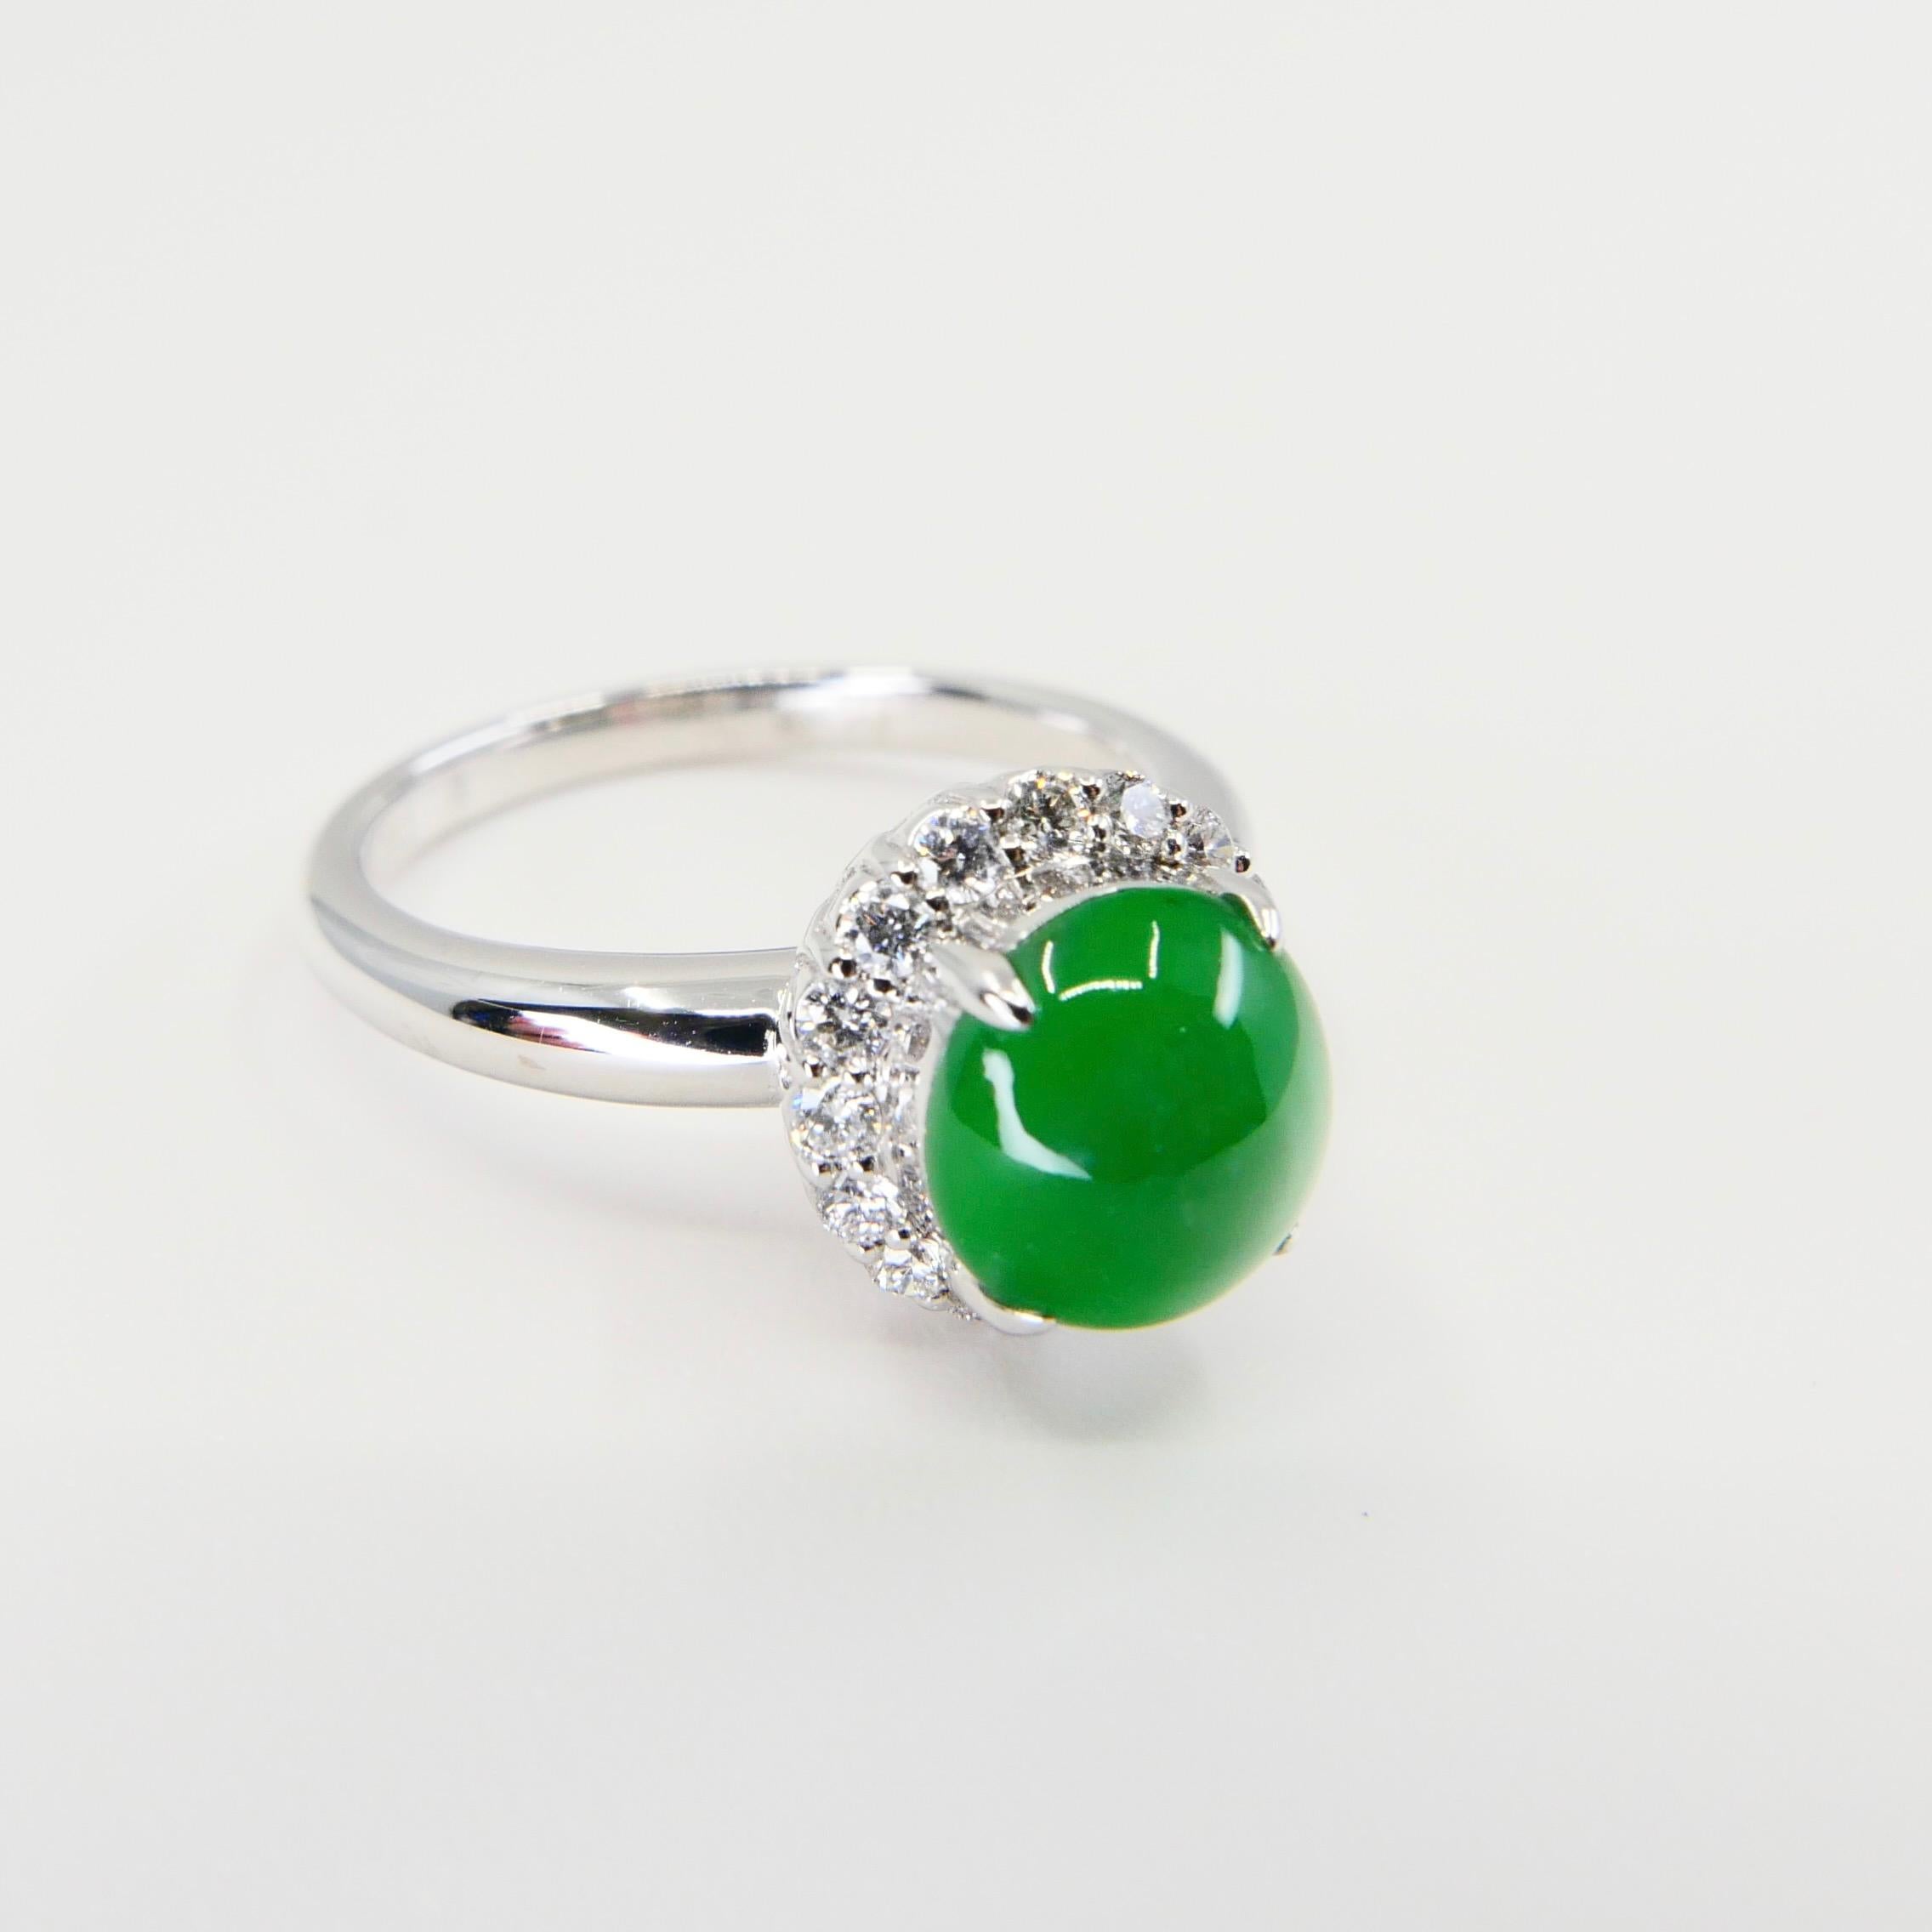 Contemporary Certified Type A Icy Apple Green Jadeite Jade and Diamond Ring, Super Glow For Sale